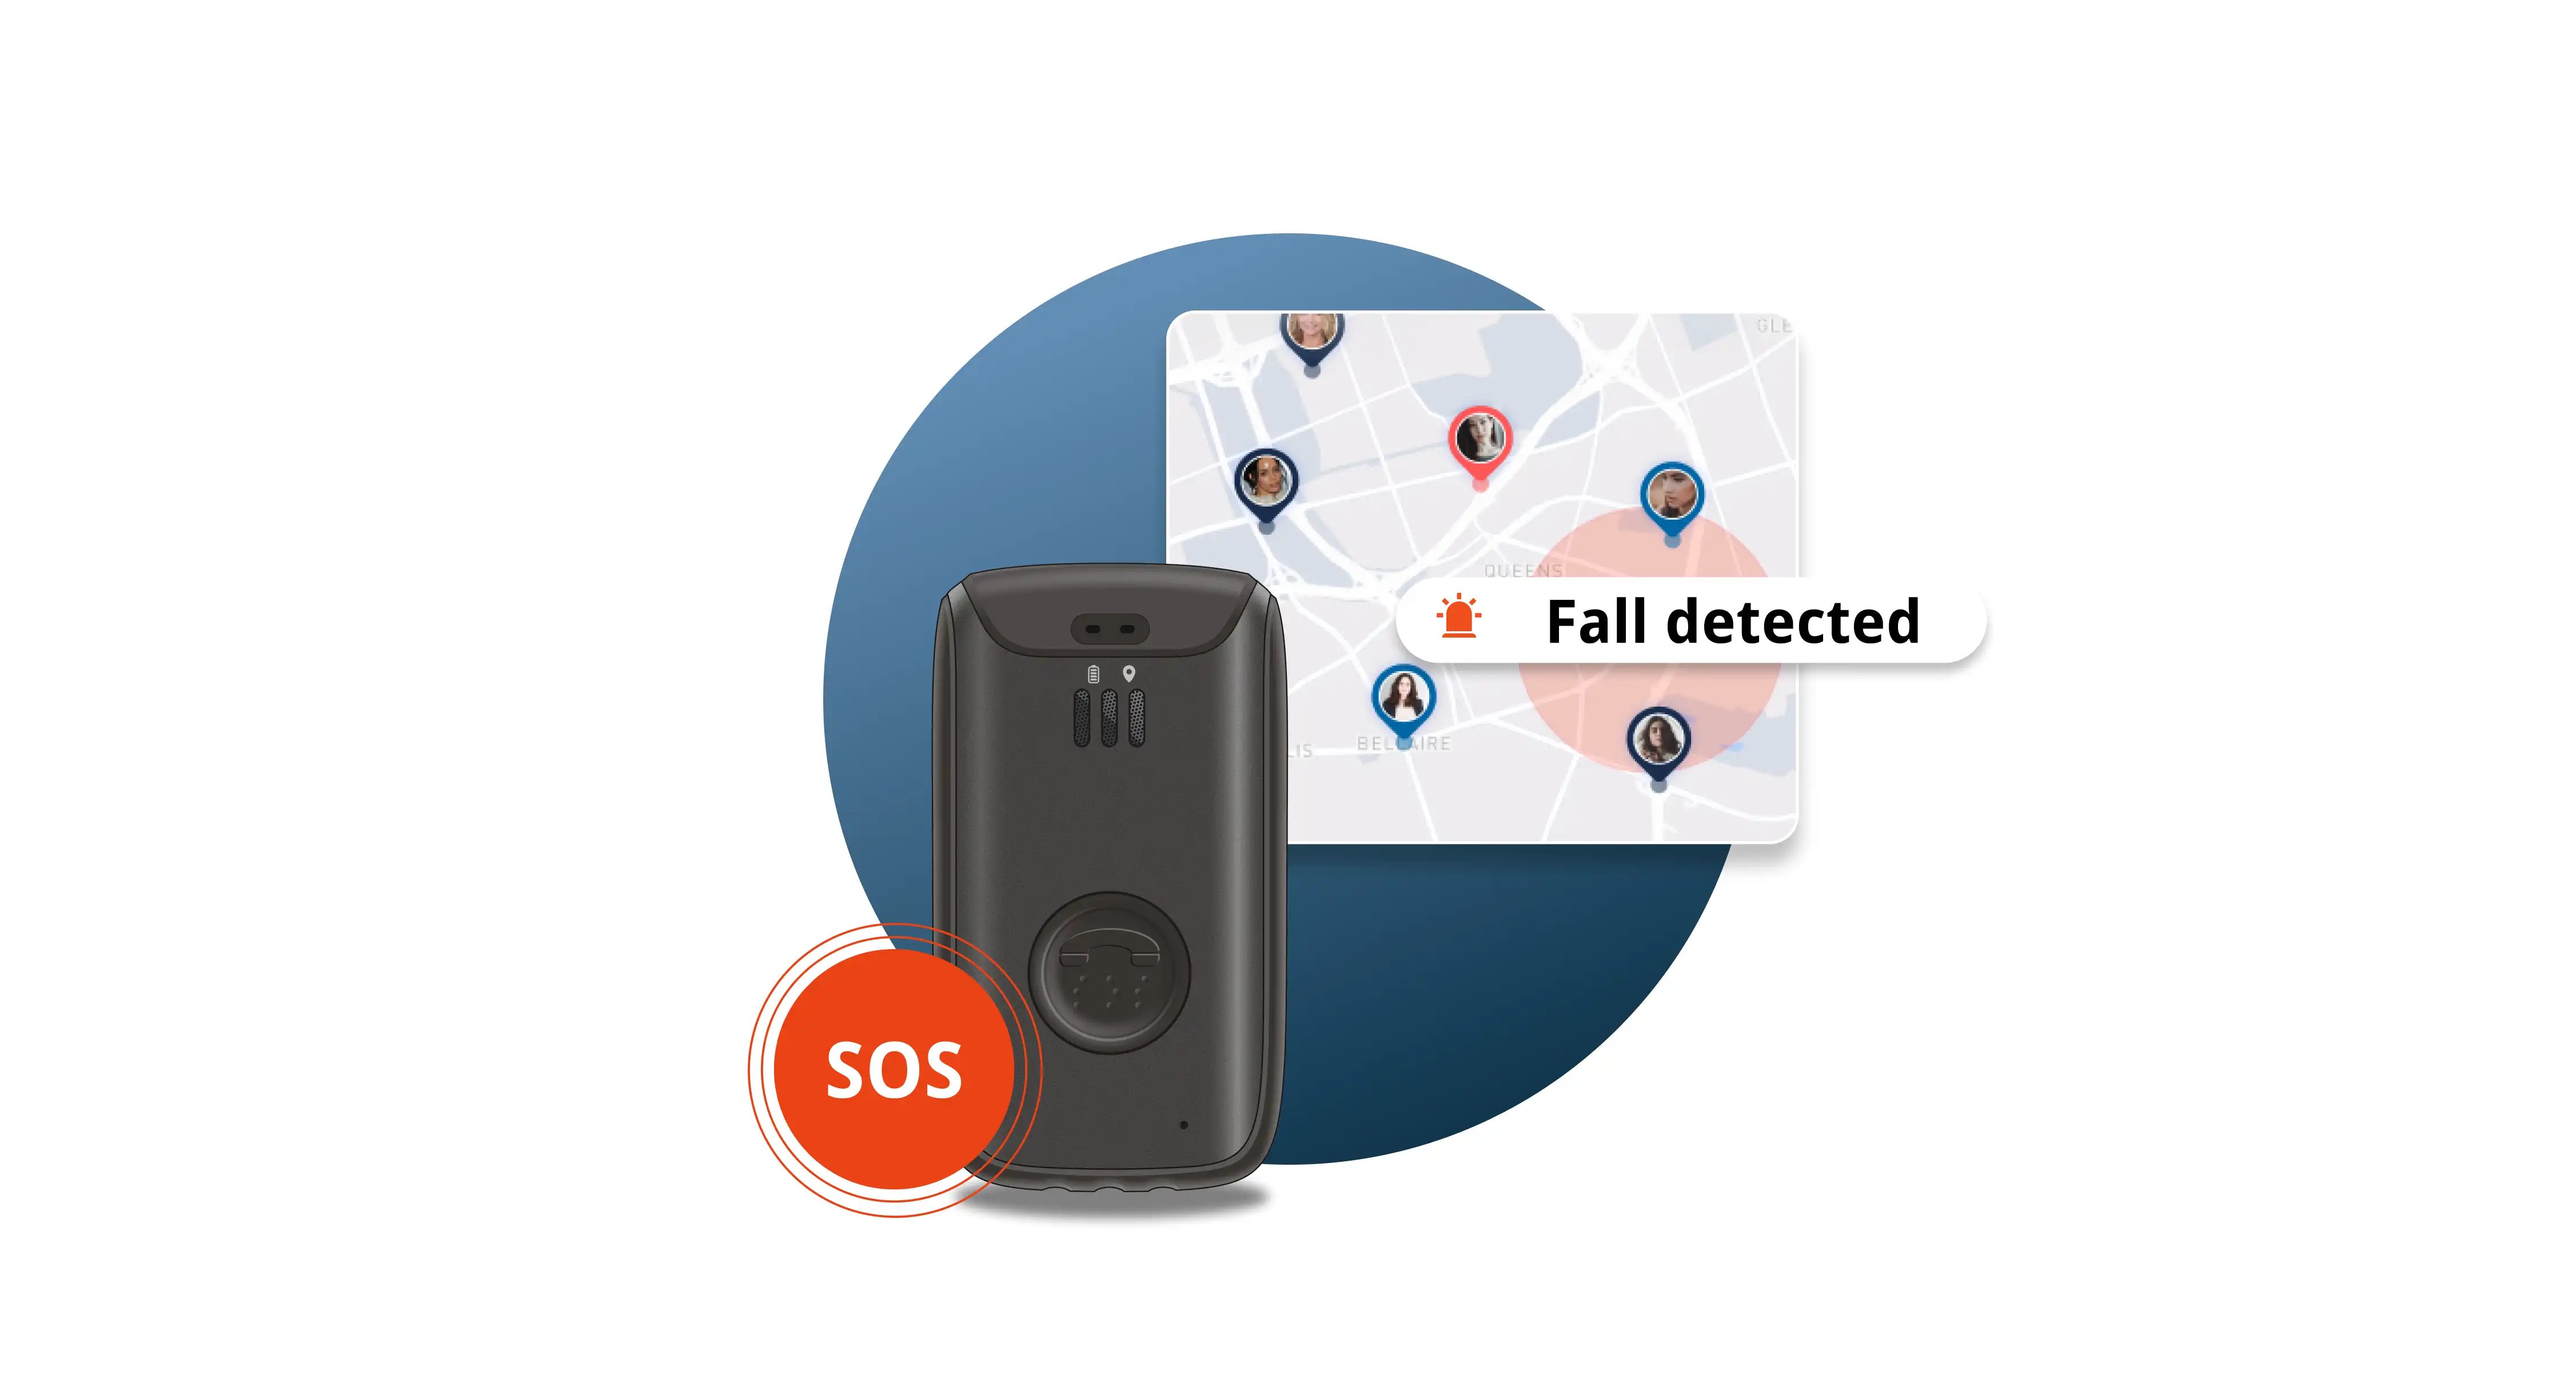 Lone worker safety devices-Fall detection